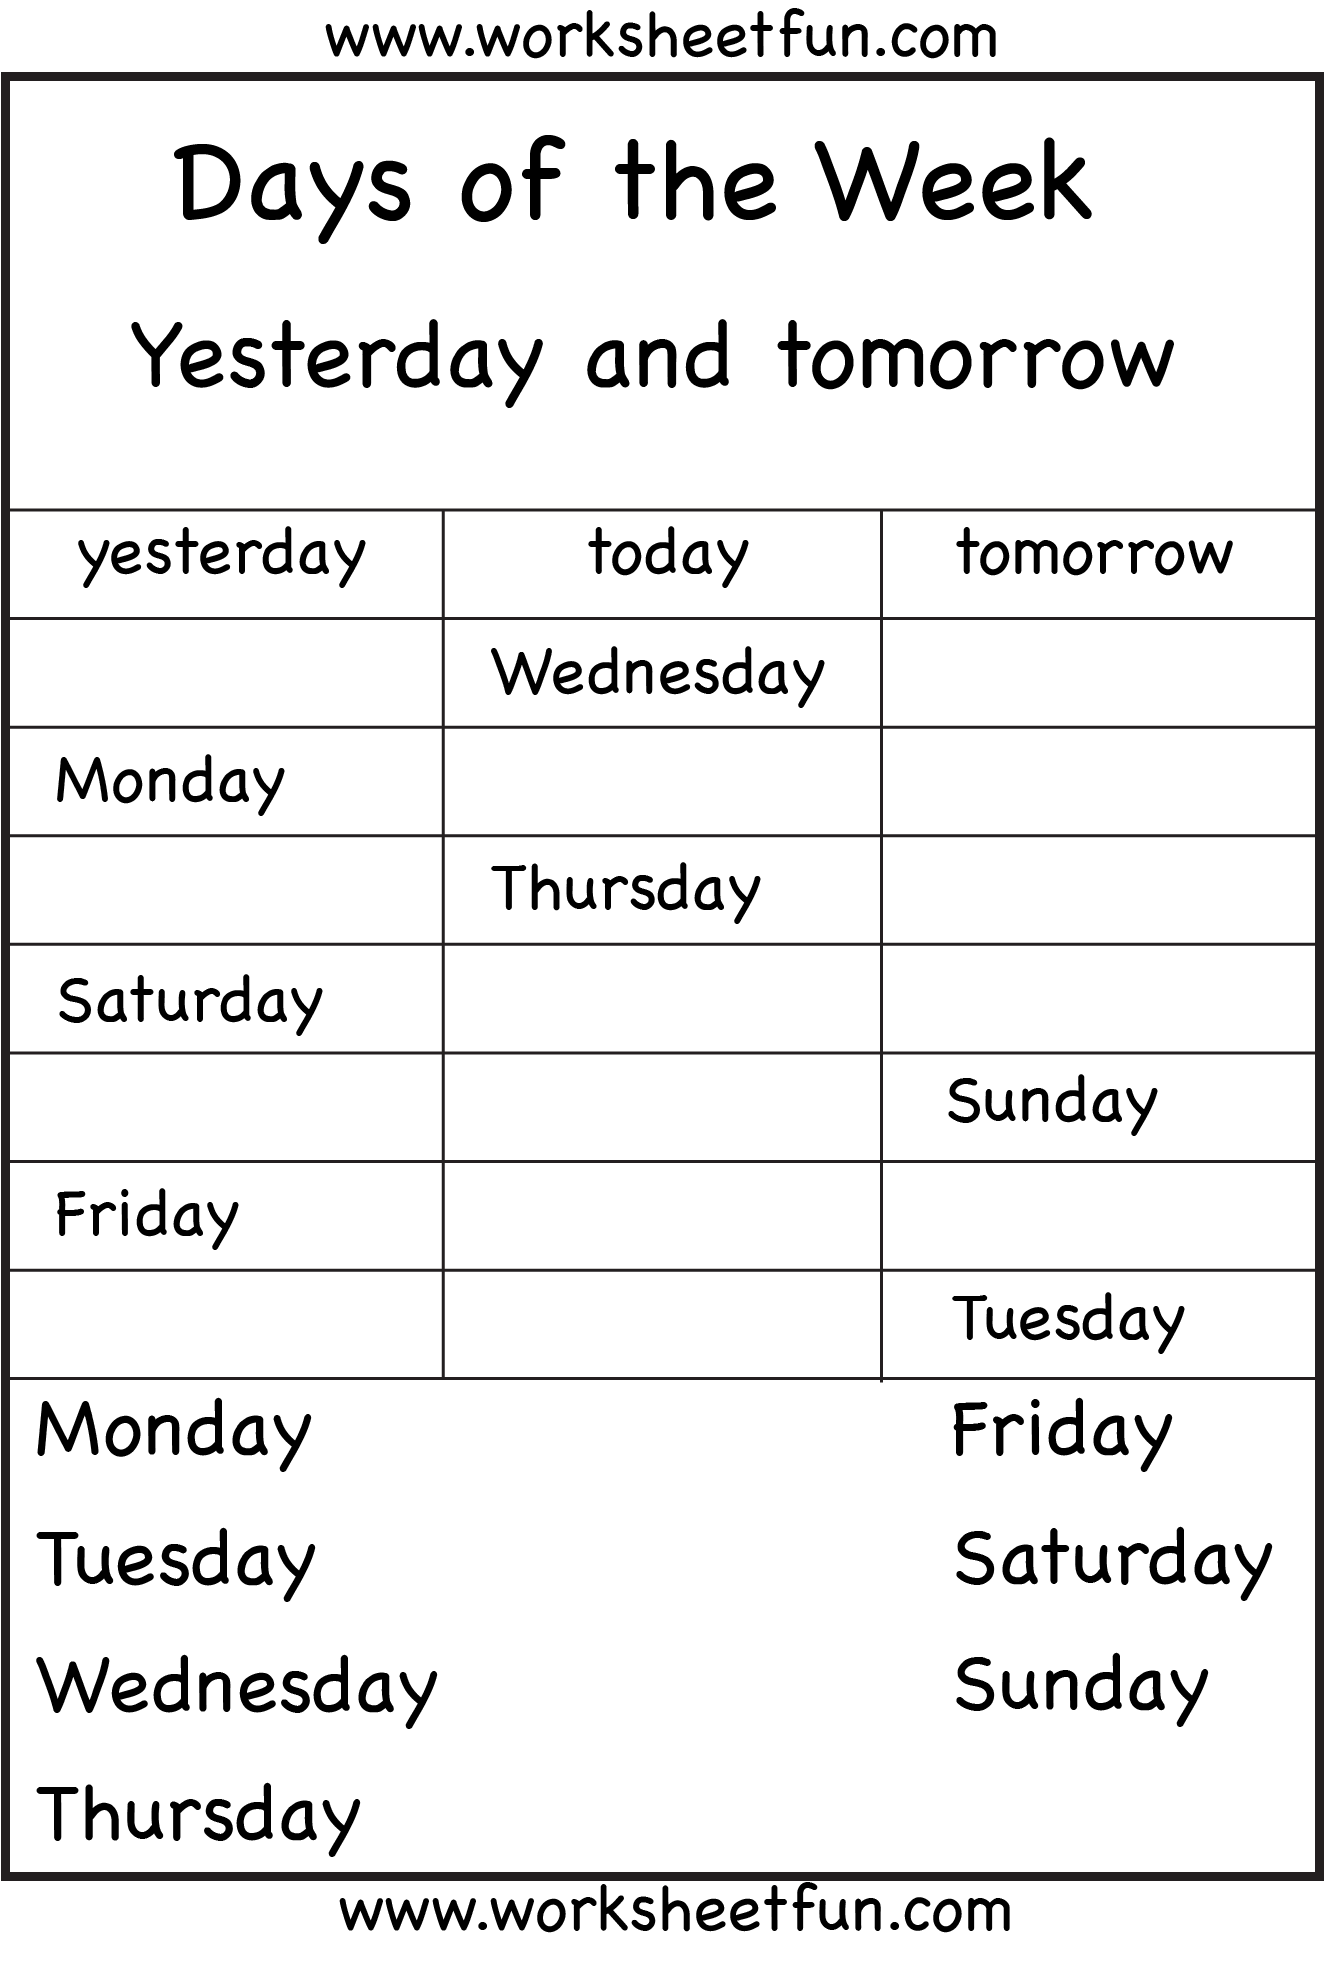 Yareli Leon Paste The Days Of The Week In The Correct Order In